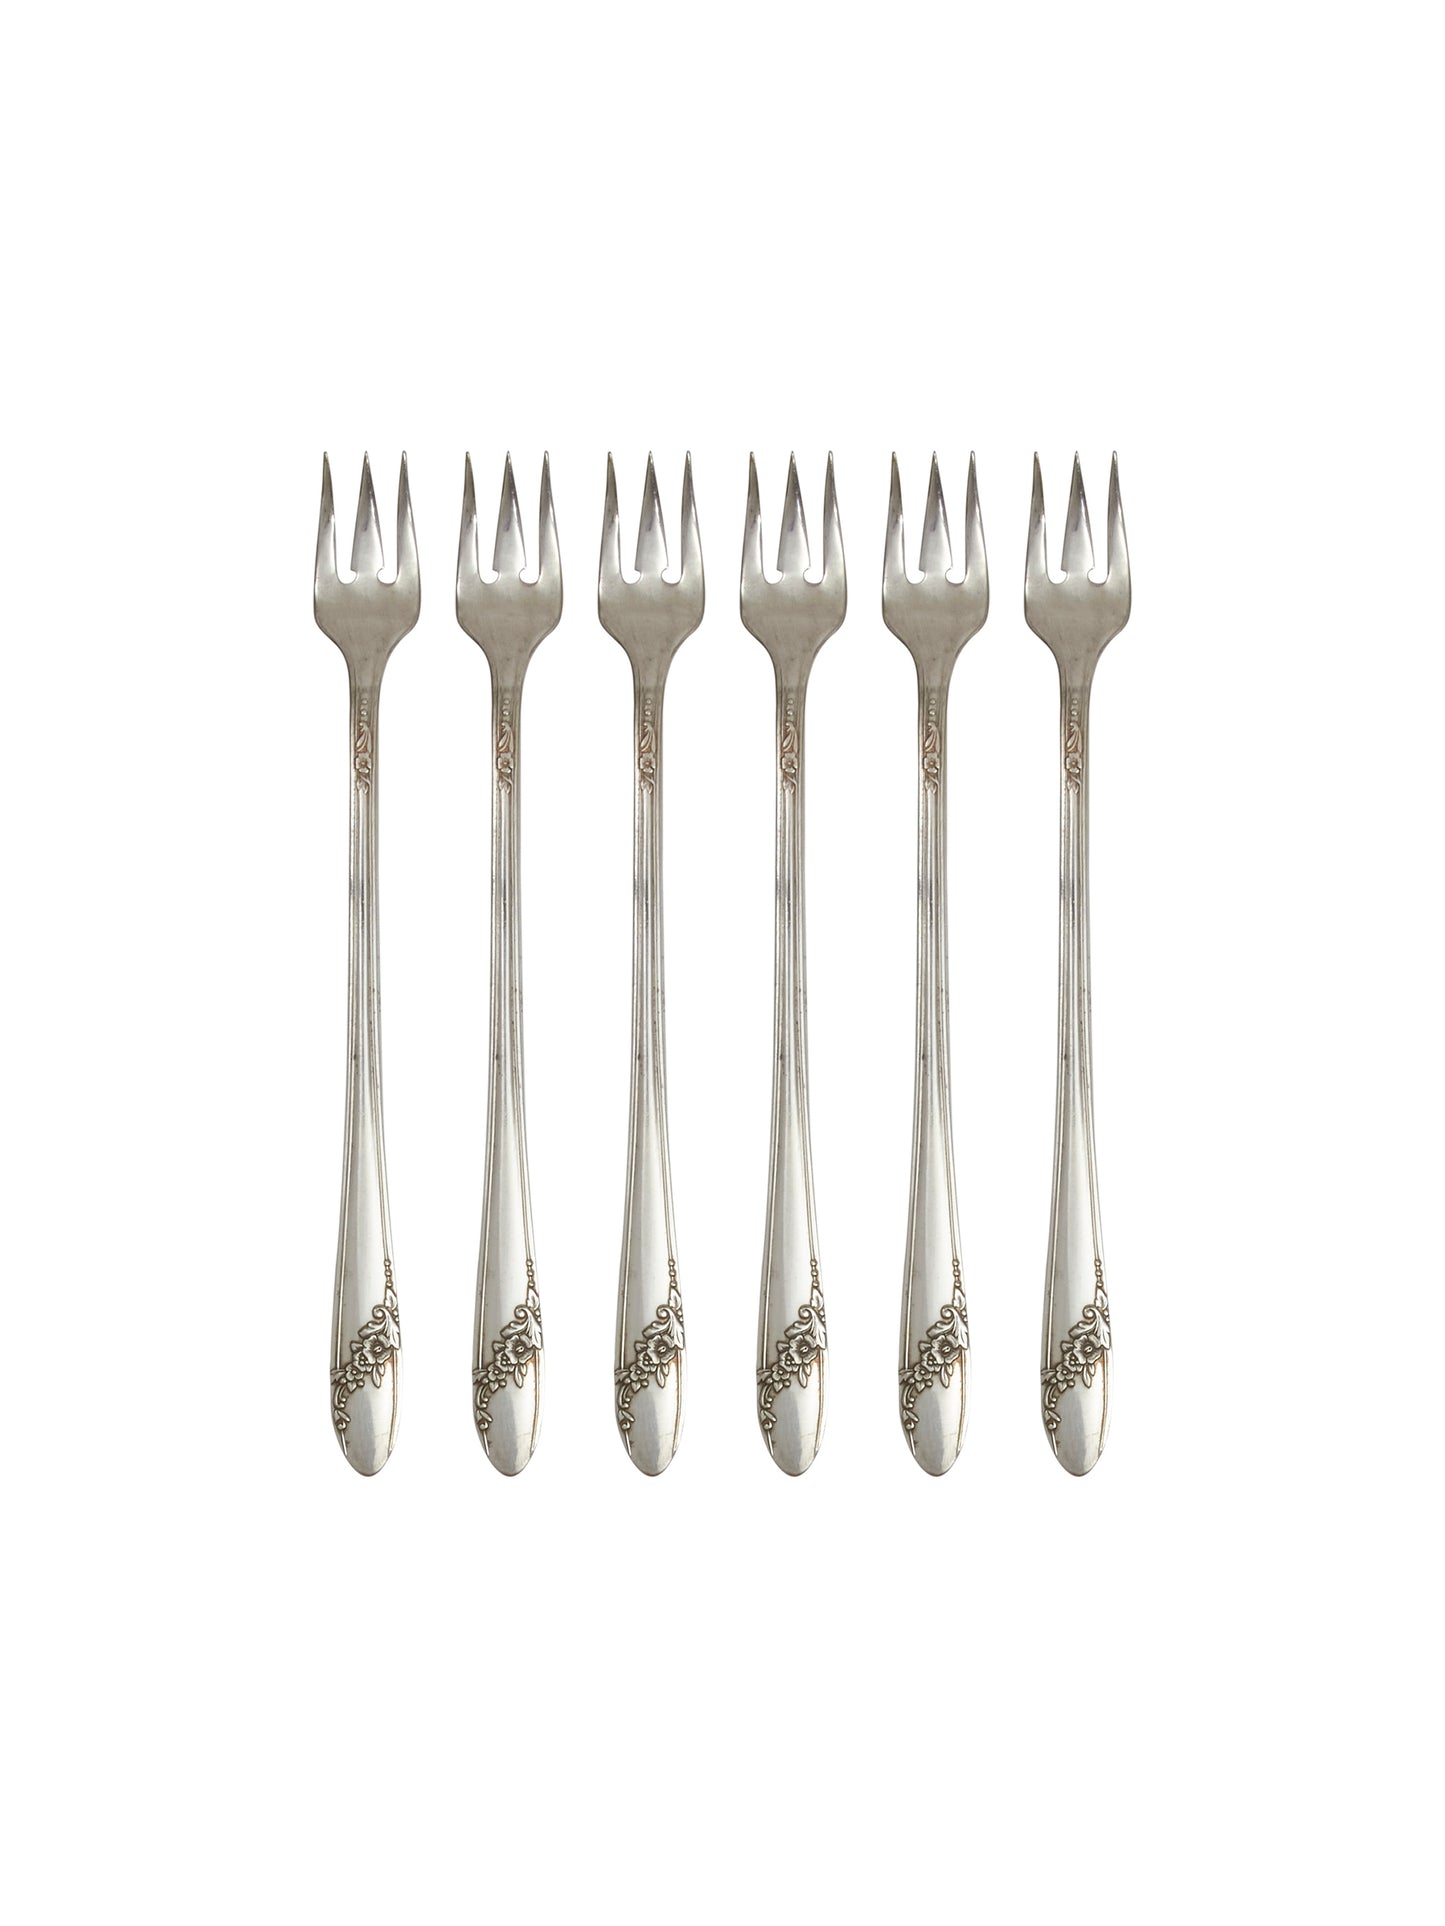 Vintage 1950s Oneida Endearable Oyster Forks Set of Six Weston Table